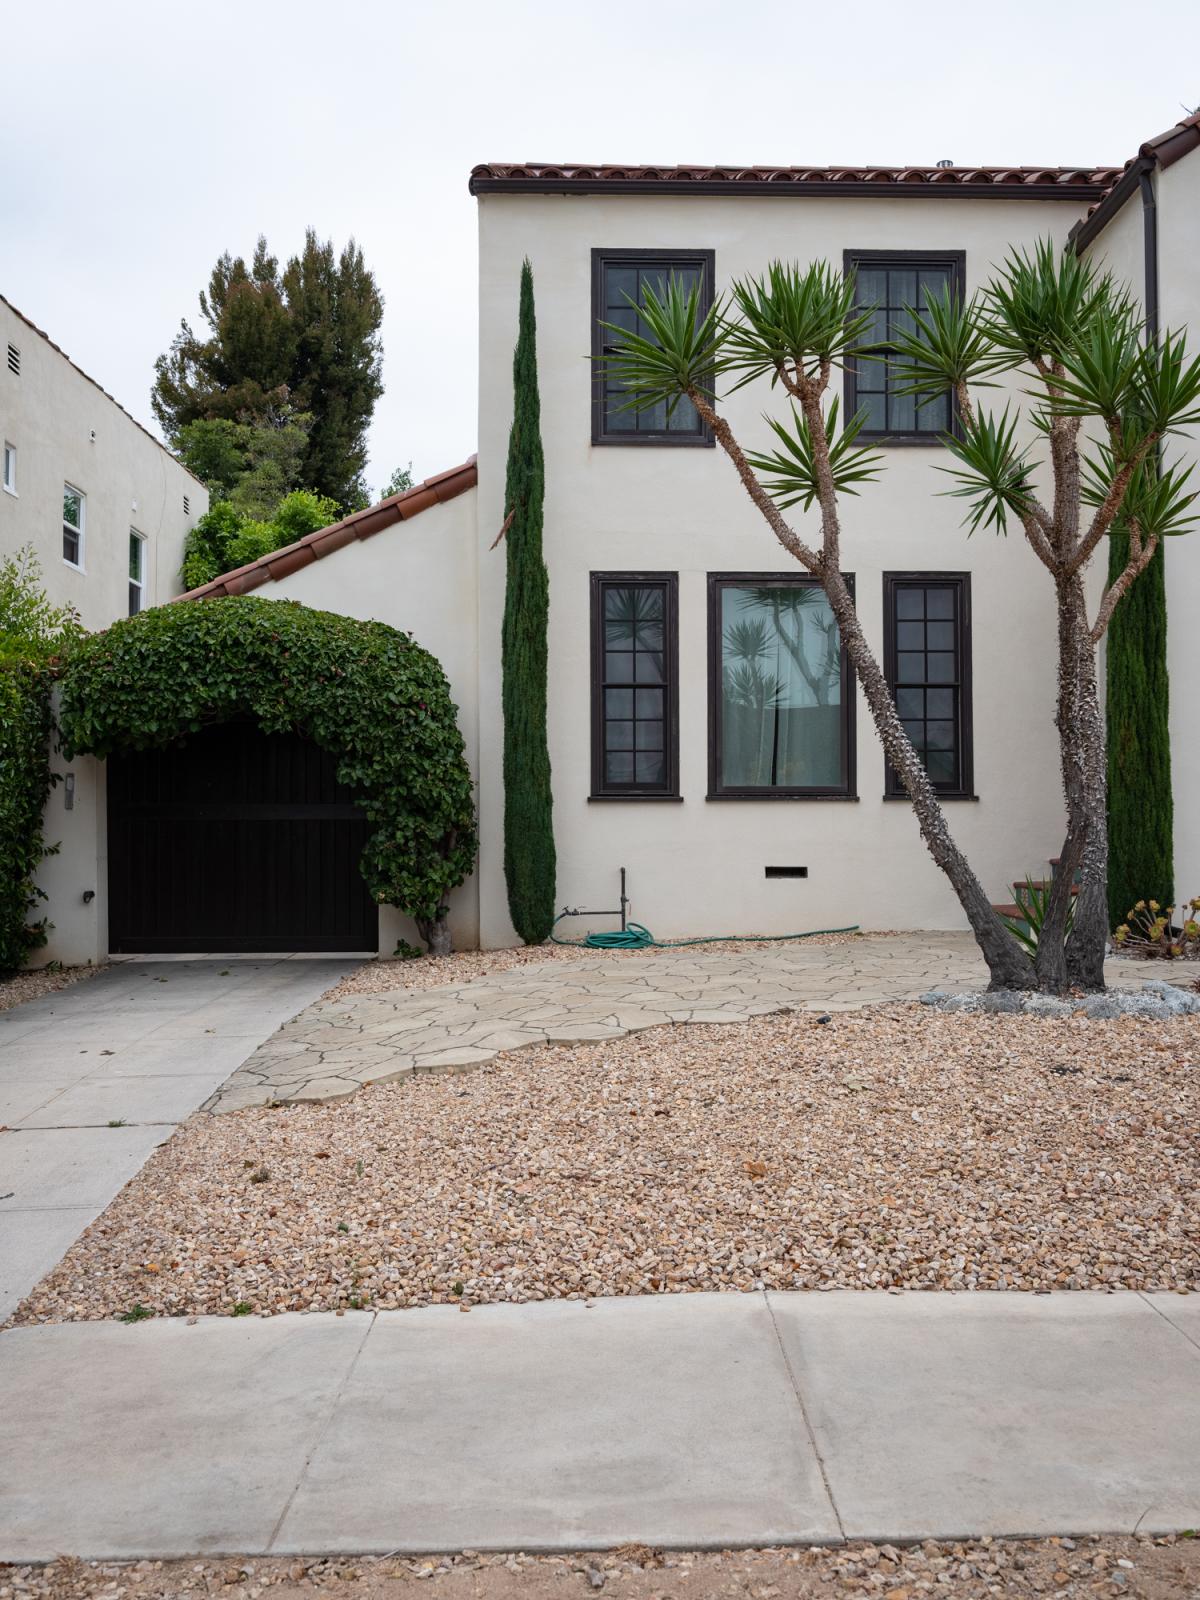 Water Cops - WSJ - A home in the mid-Wilshire neighborhood of Los Angeles,...